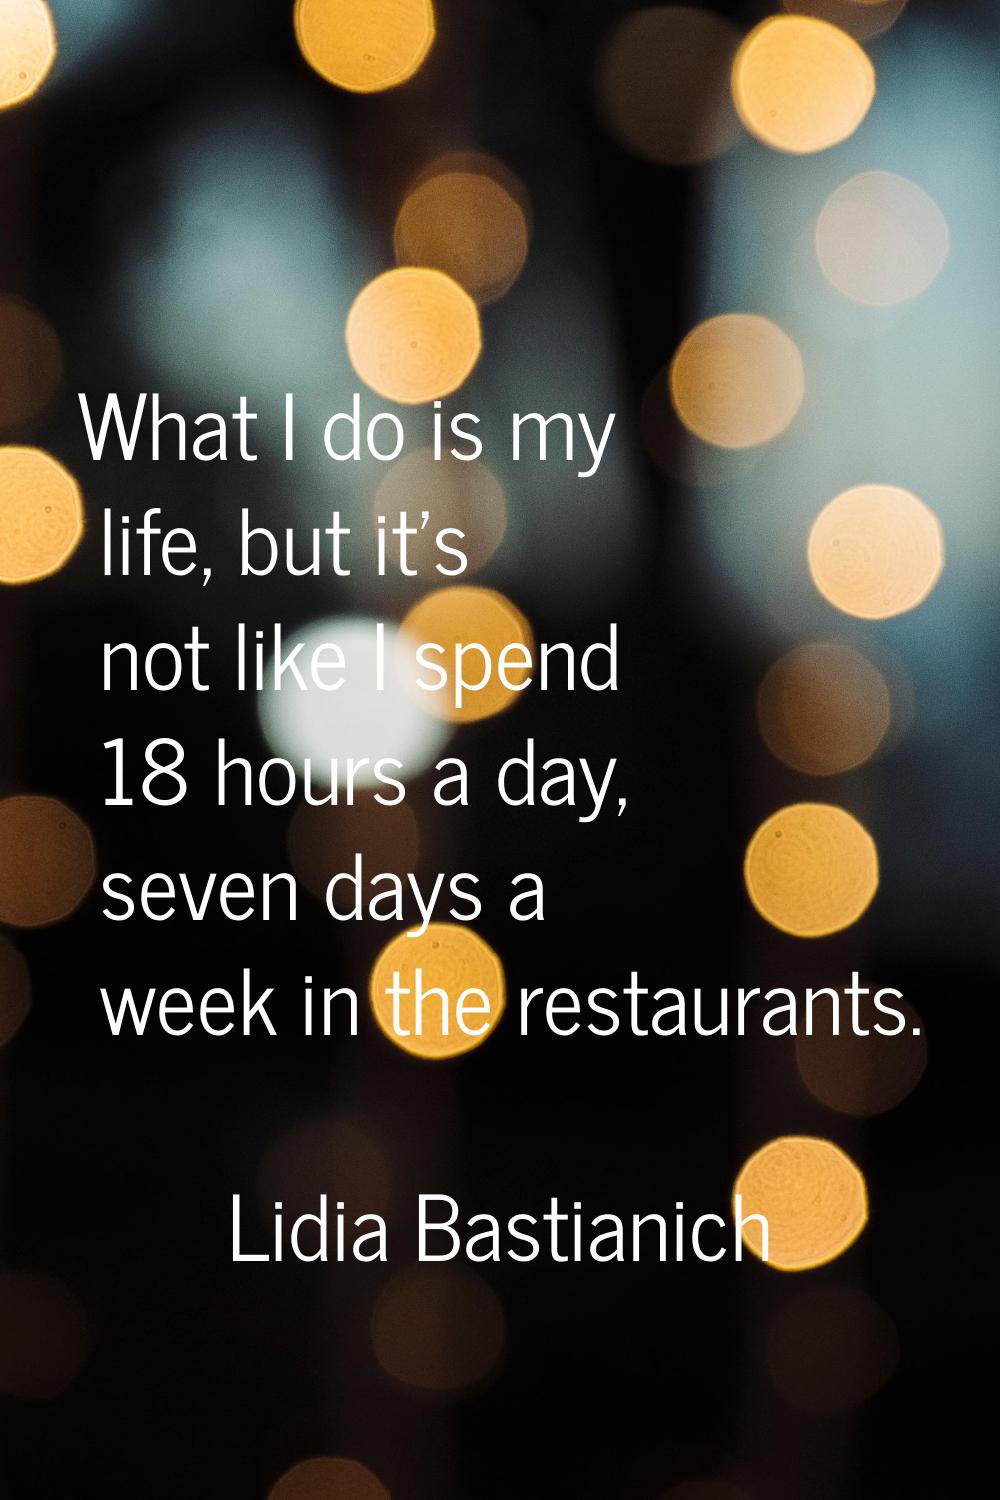 What I do is my life, but it's not like I spend 18 hours a day, seven days a week in the restaurant